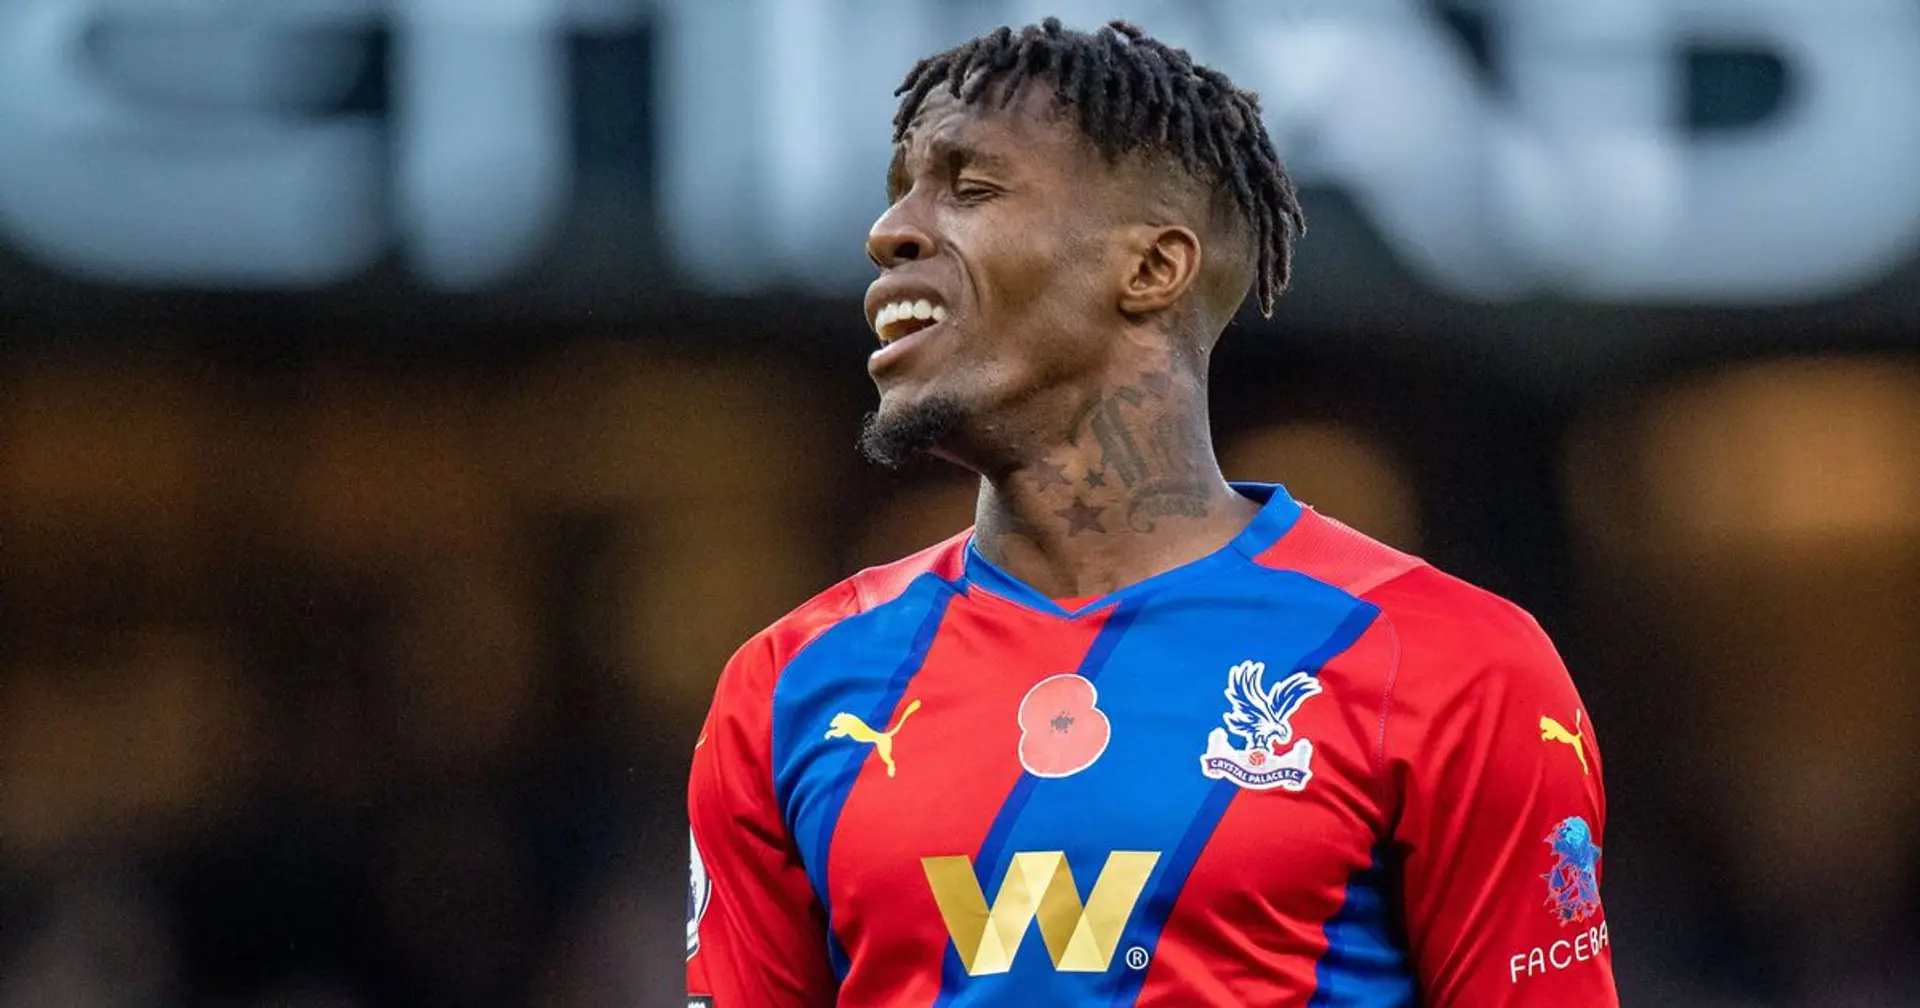 Wilfried Zaha racially abused on social media after Crystal Palace's win against Manchester City